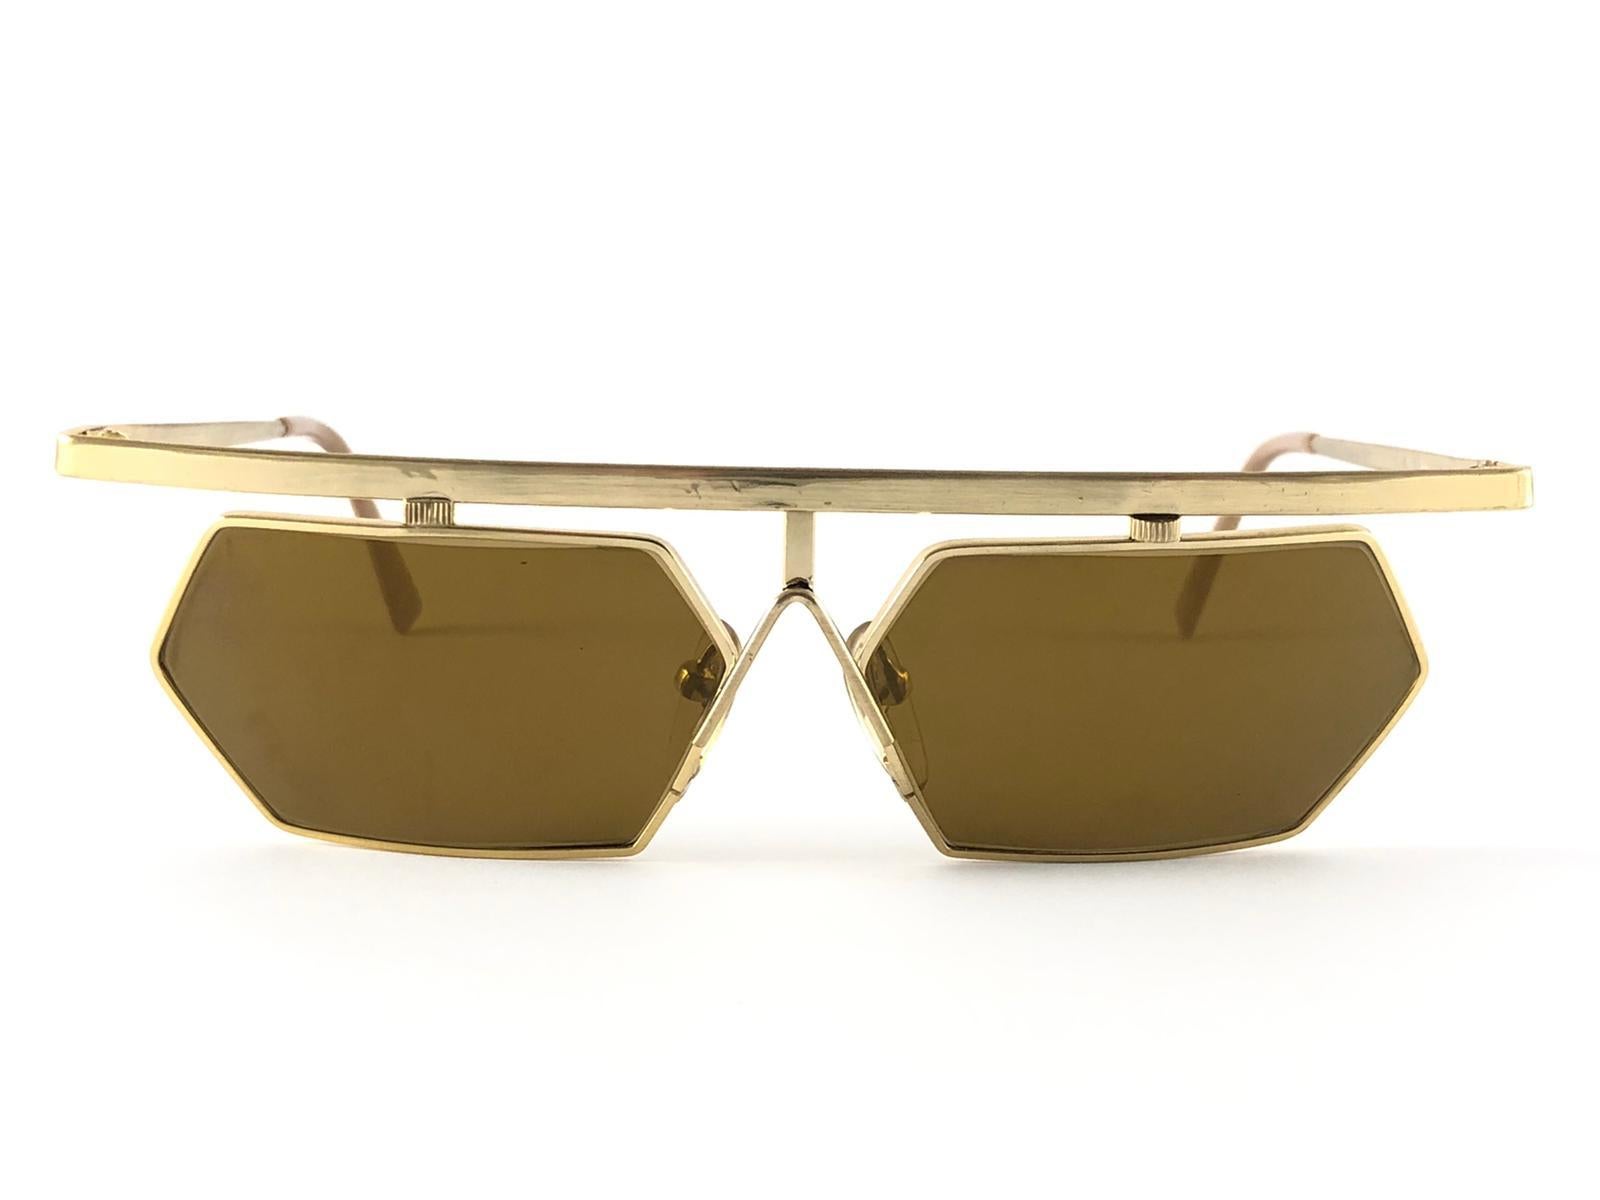 Extremely rare and highly coveted i'dentity frame part of the iconic collection made famous by the pop artist Andy Warhol.

Its simple but effective design gave the creator's, Larry Leight, the genesis of his long life affair in the eye wear world